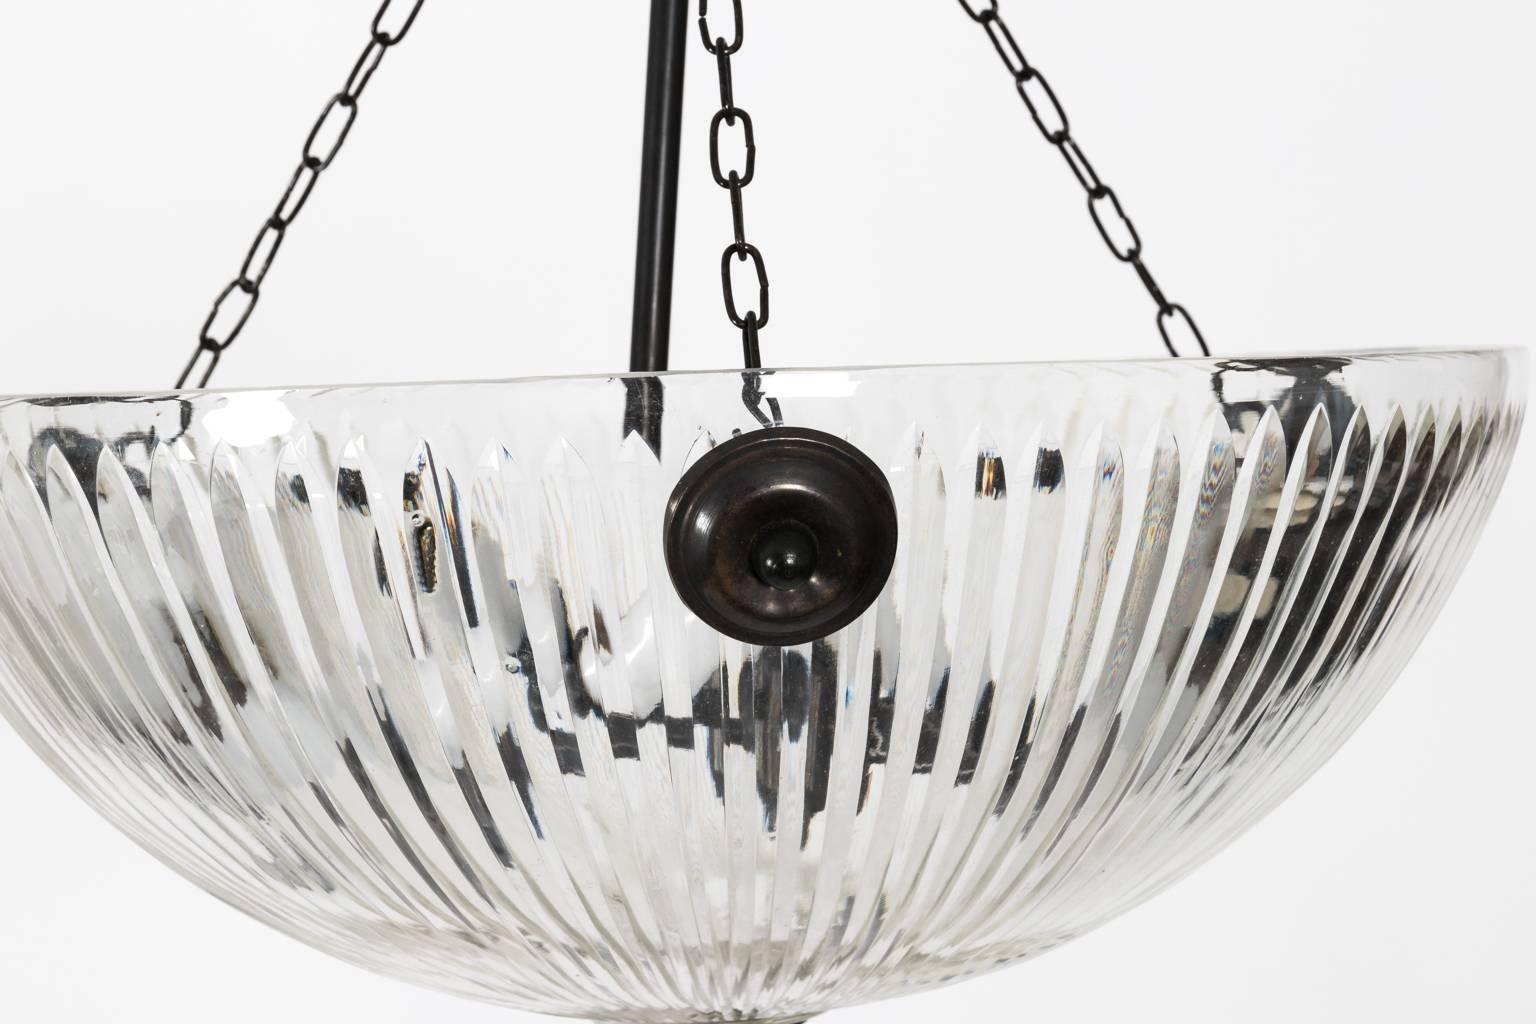 Hanging cut-glass light in a distressed bronze finish, circa mid-20th century.
 